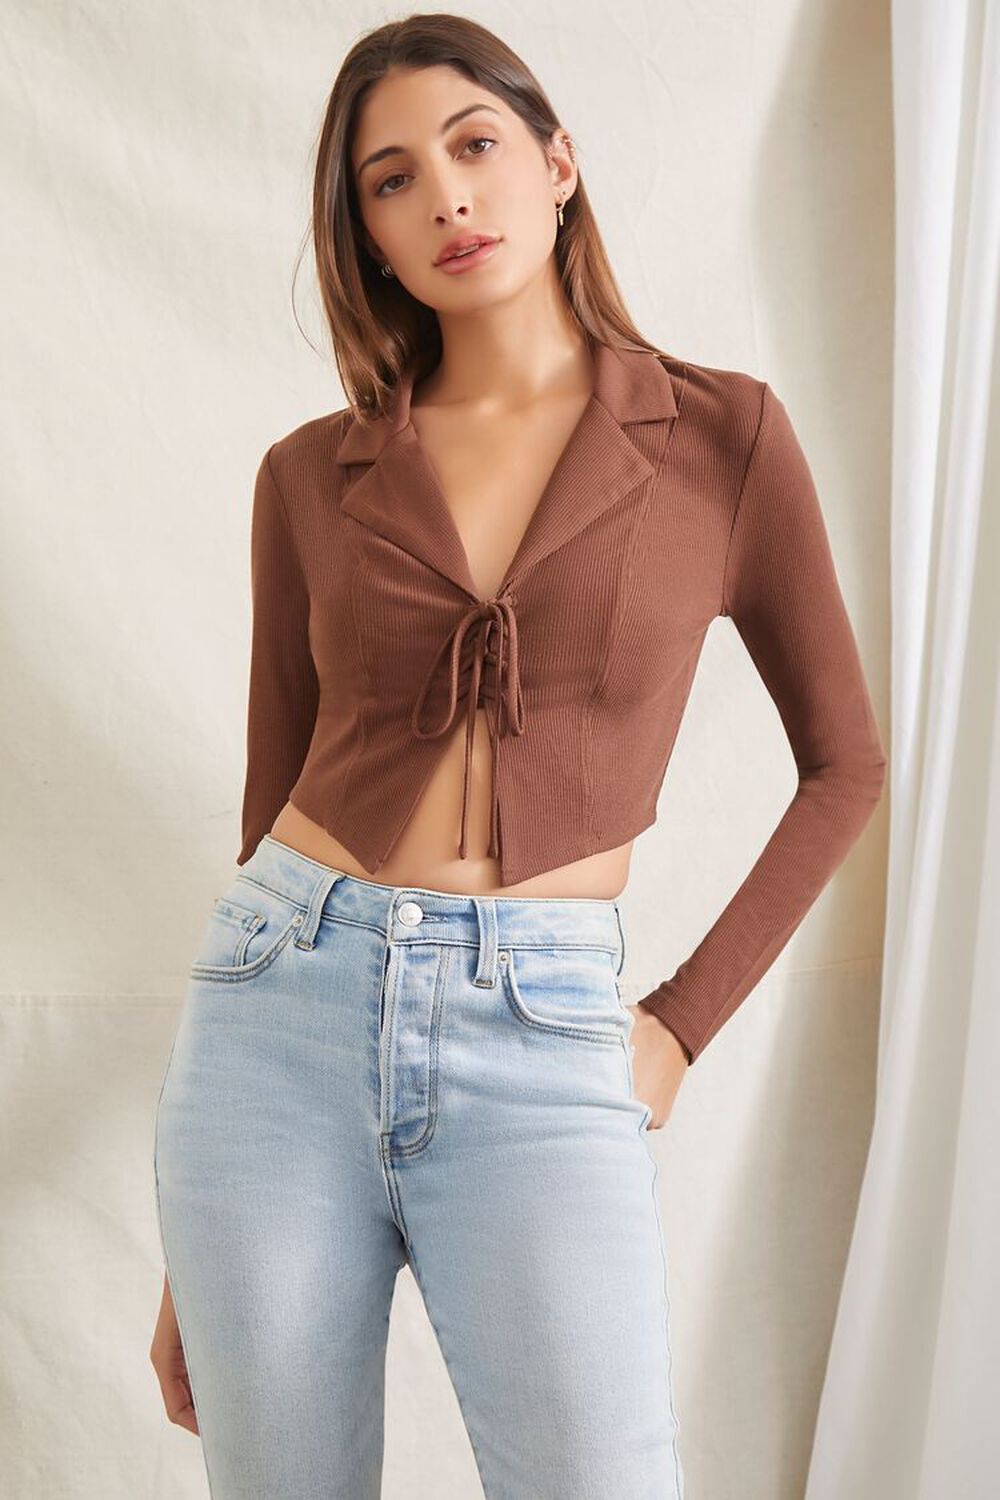 Long-Sleeve Tie-Front Top | Forever 21 | Forever 21 (US)